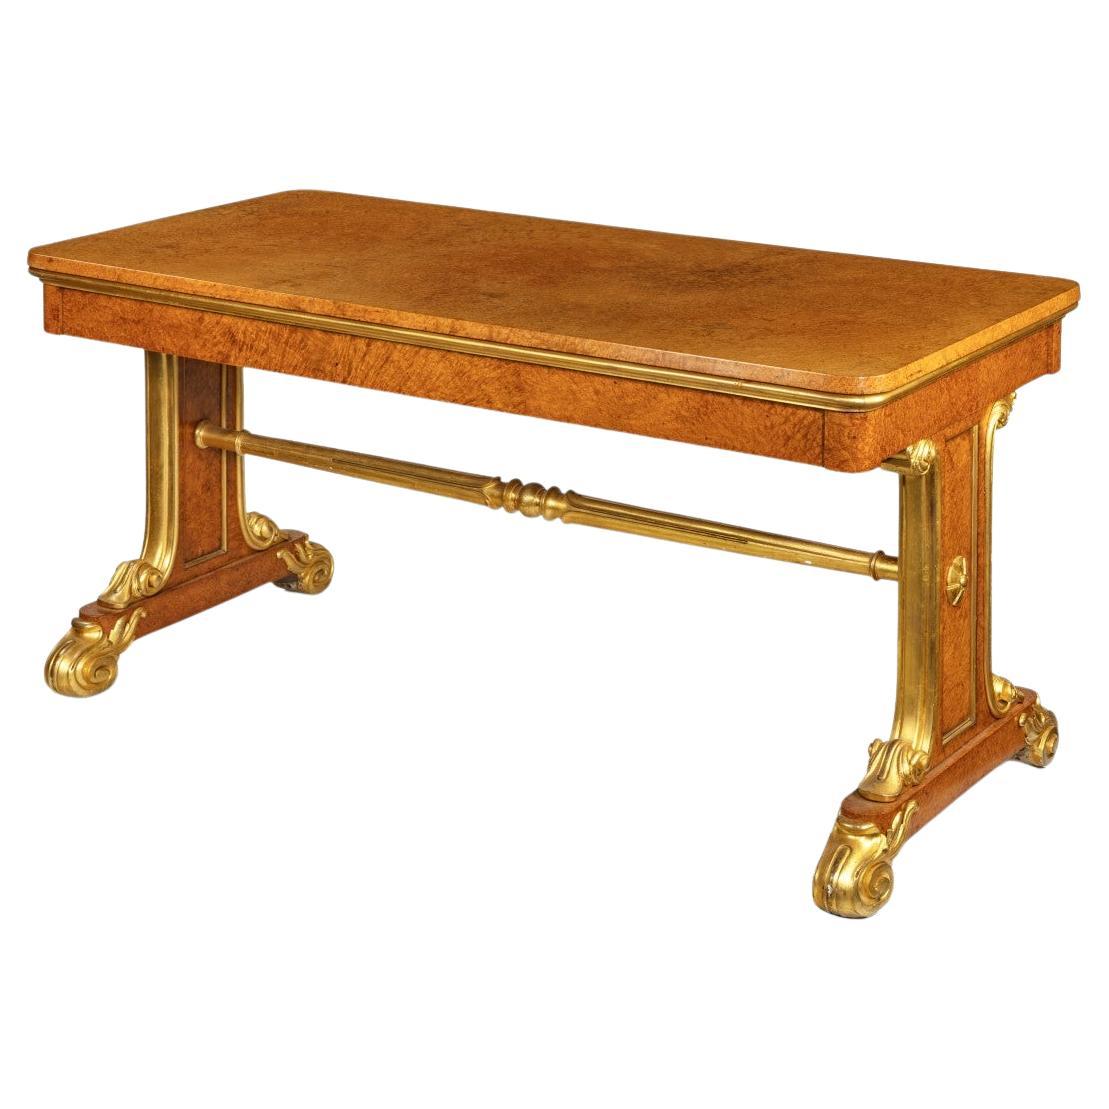 Regency Amboyna and Gilt Library Table Attributed to Seddon and Morel